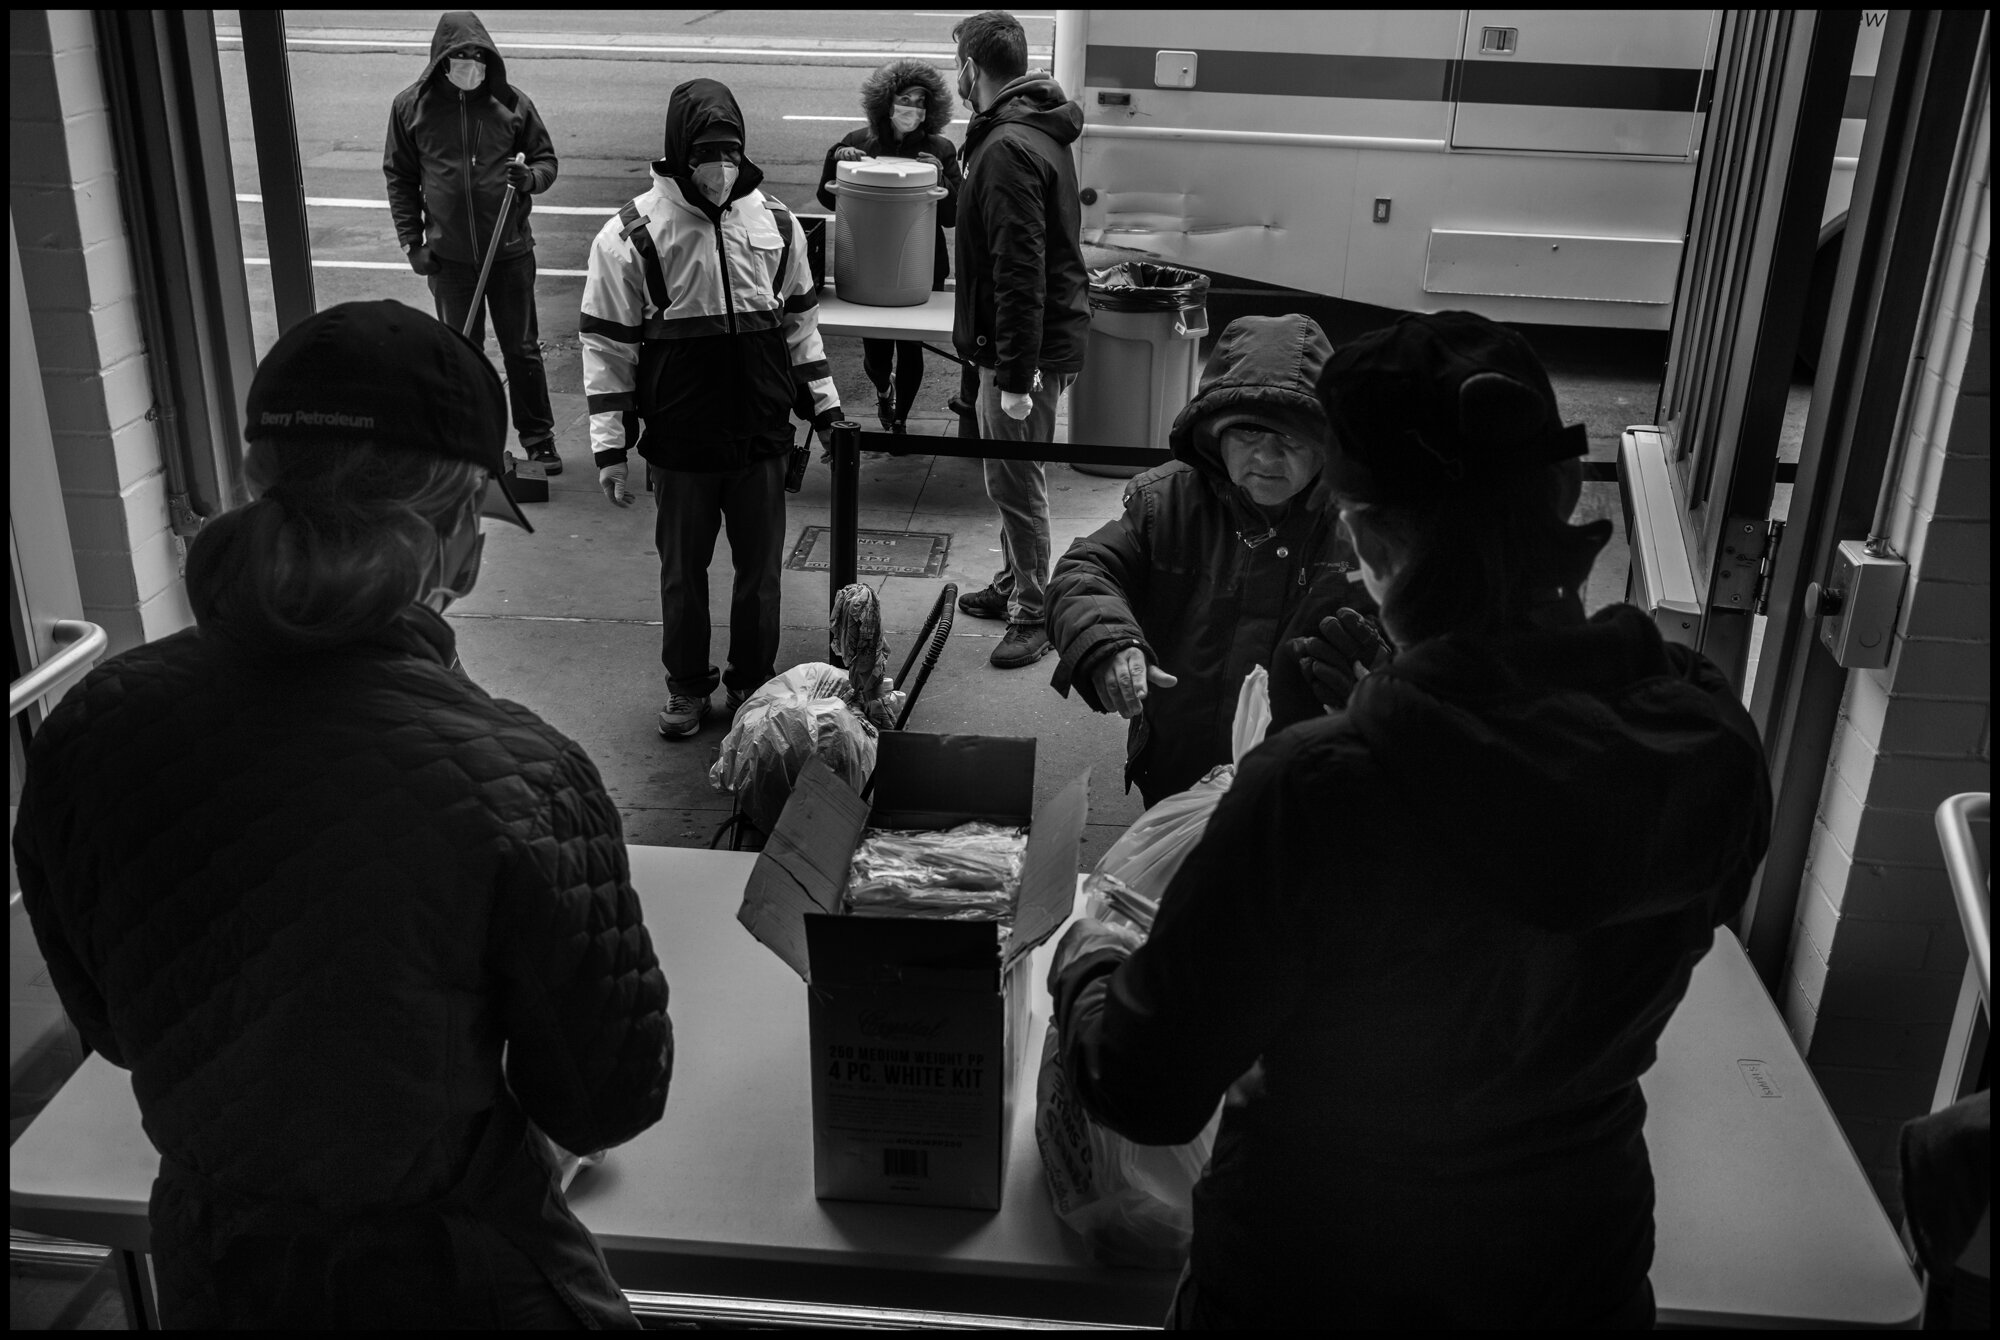  Volunteers hand out bags of food to homeless people or people without the means to buy food at this time, at The Bowery Mission in New York City.  April 10, 2020. © Peter Turnley  ID# 18-017 